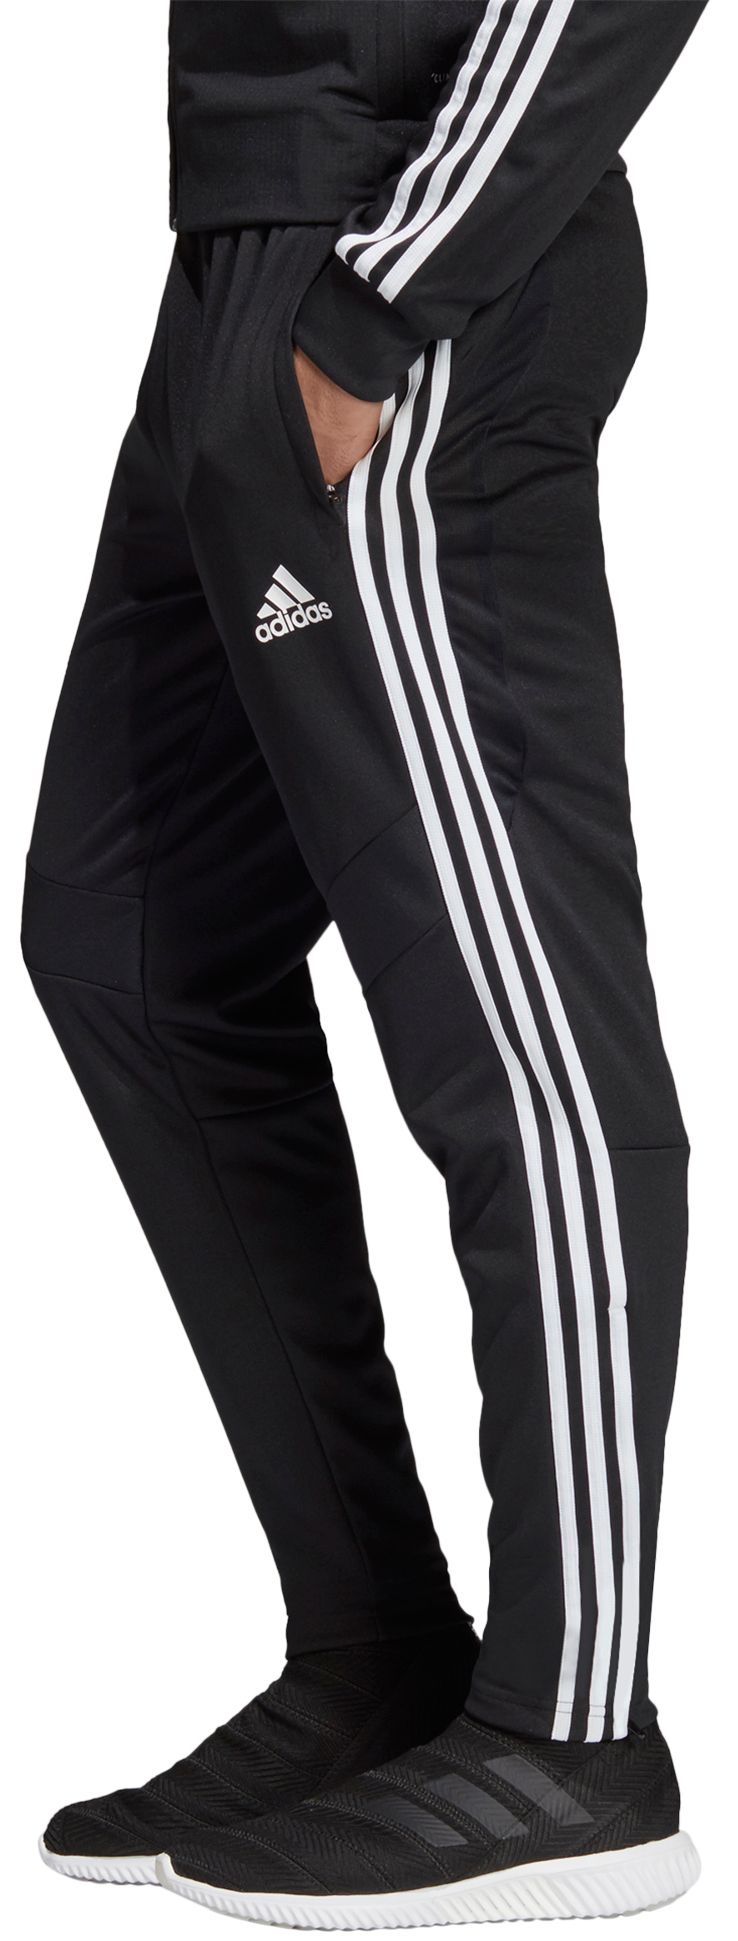 cheap adidas clothing online